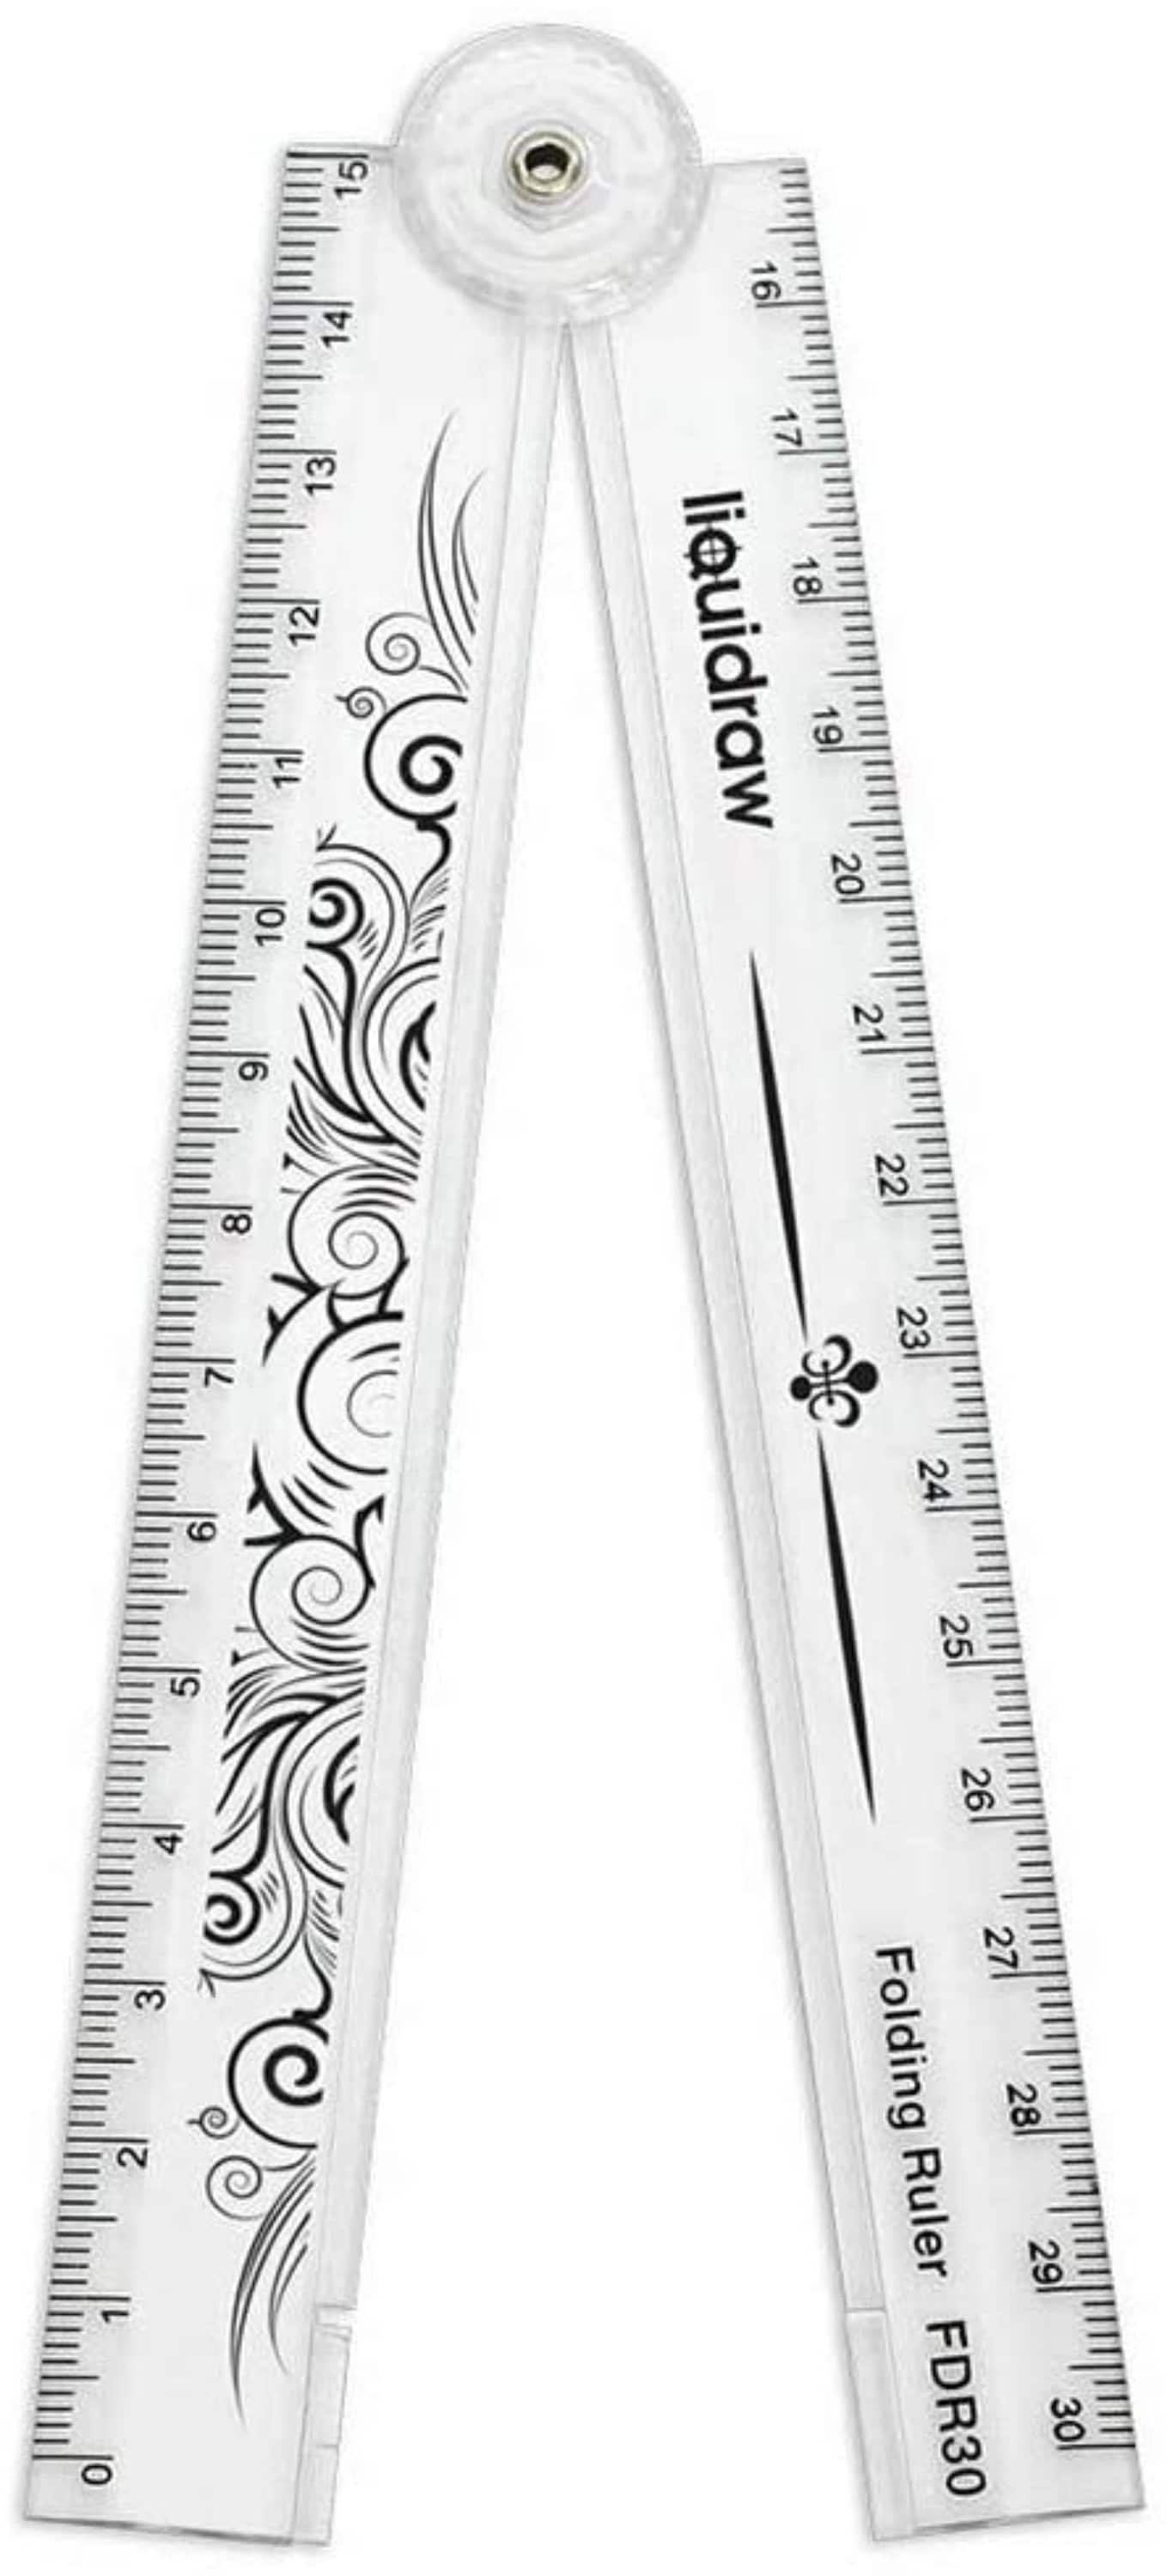 GraphicPro 30cm Rolling Ruler –